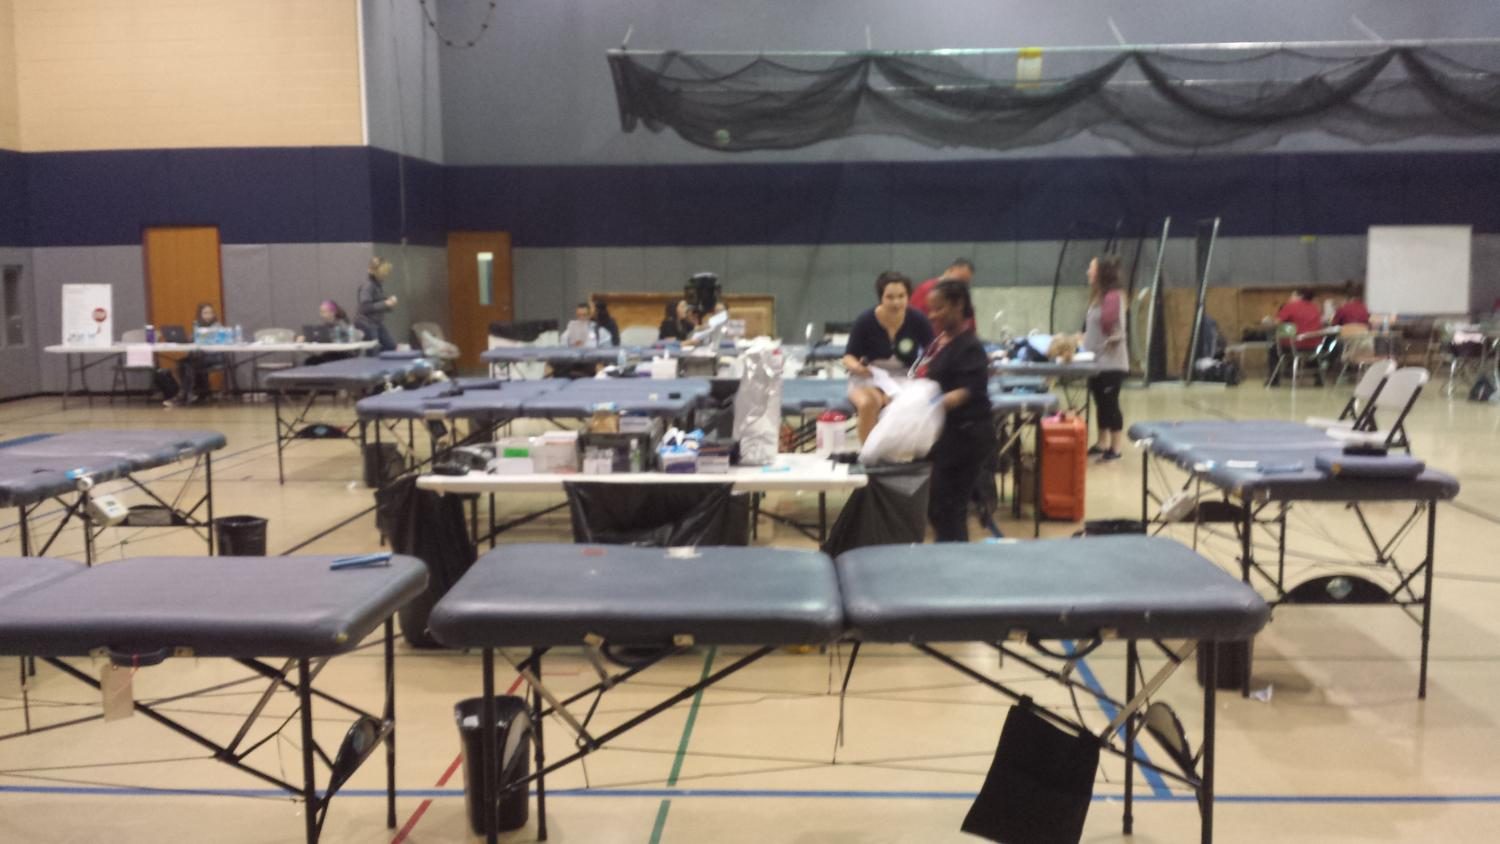 On Friday, May 12th, NPHS hosted the American Red Cross for the third blood drive of the year, organized by the National Honor Society.